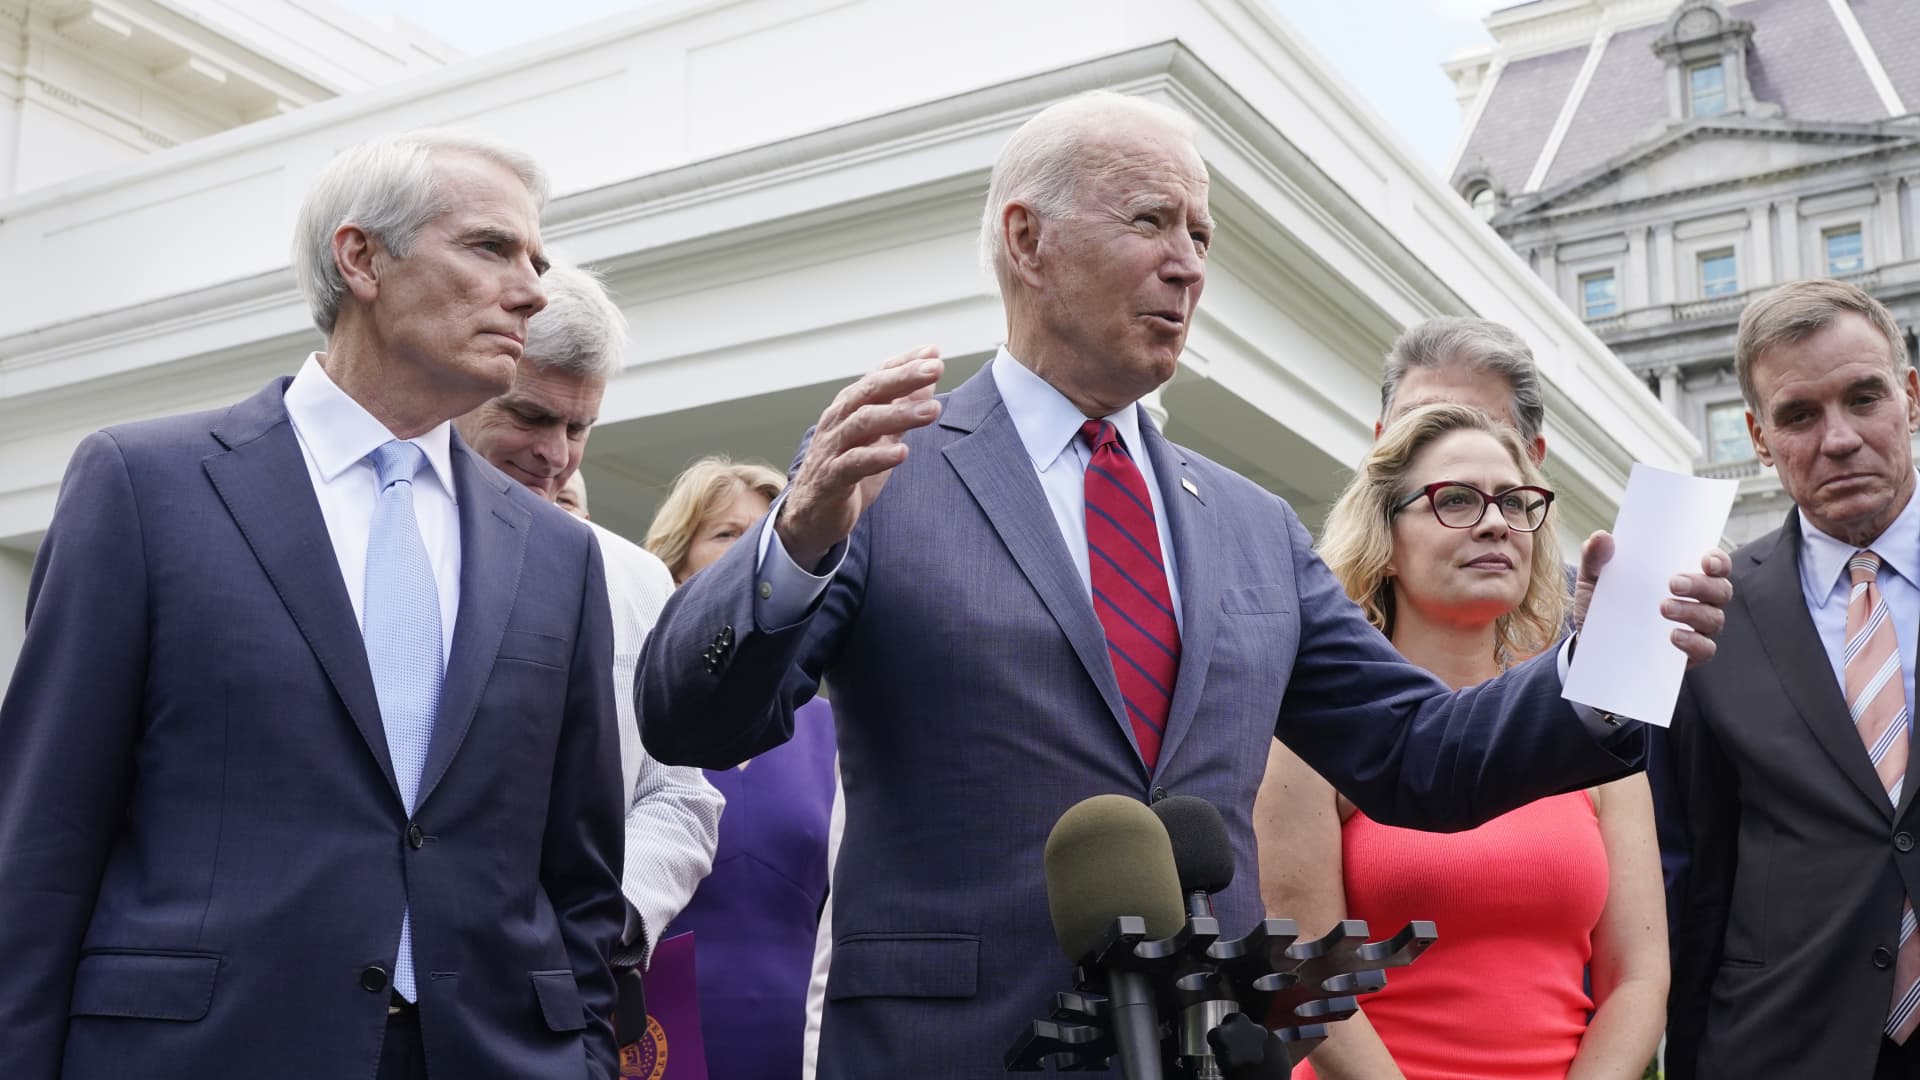 President Joe Biden, with a bipartisan group of senators, speaks Thursday June 24, 2021, outside the White House in Washington. Biden invited members of the group of 21 Republican and Democratic senators to discuss the infrastructure plan.